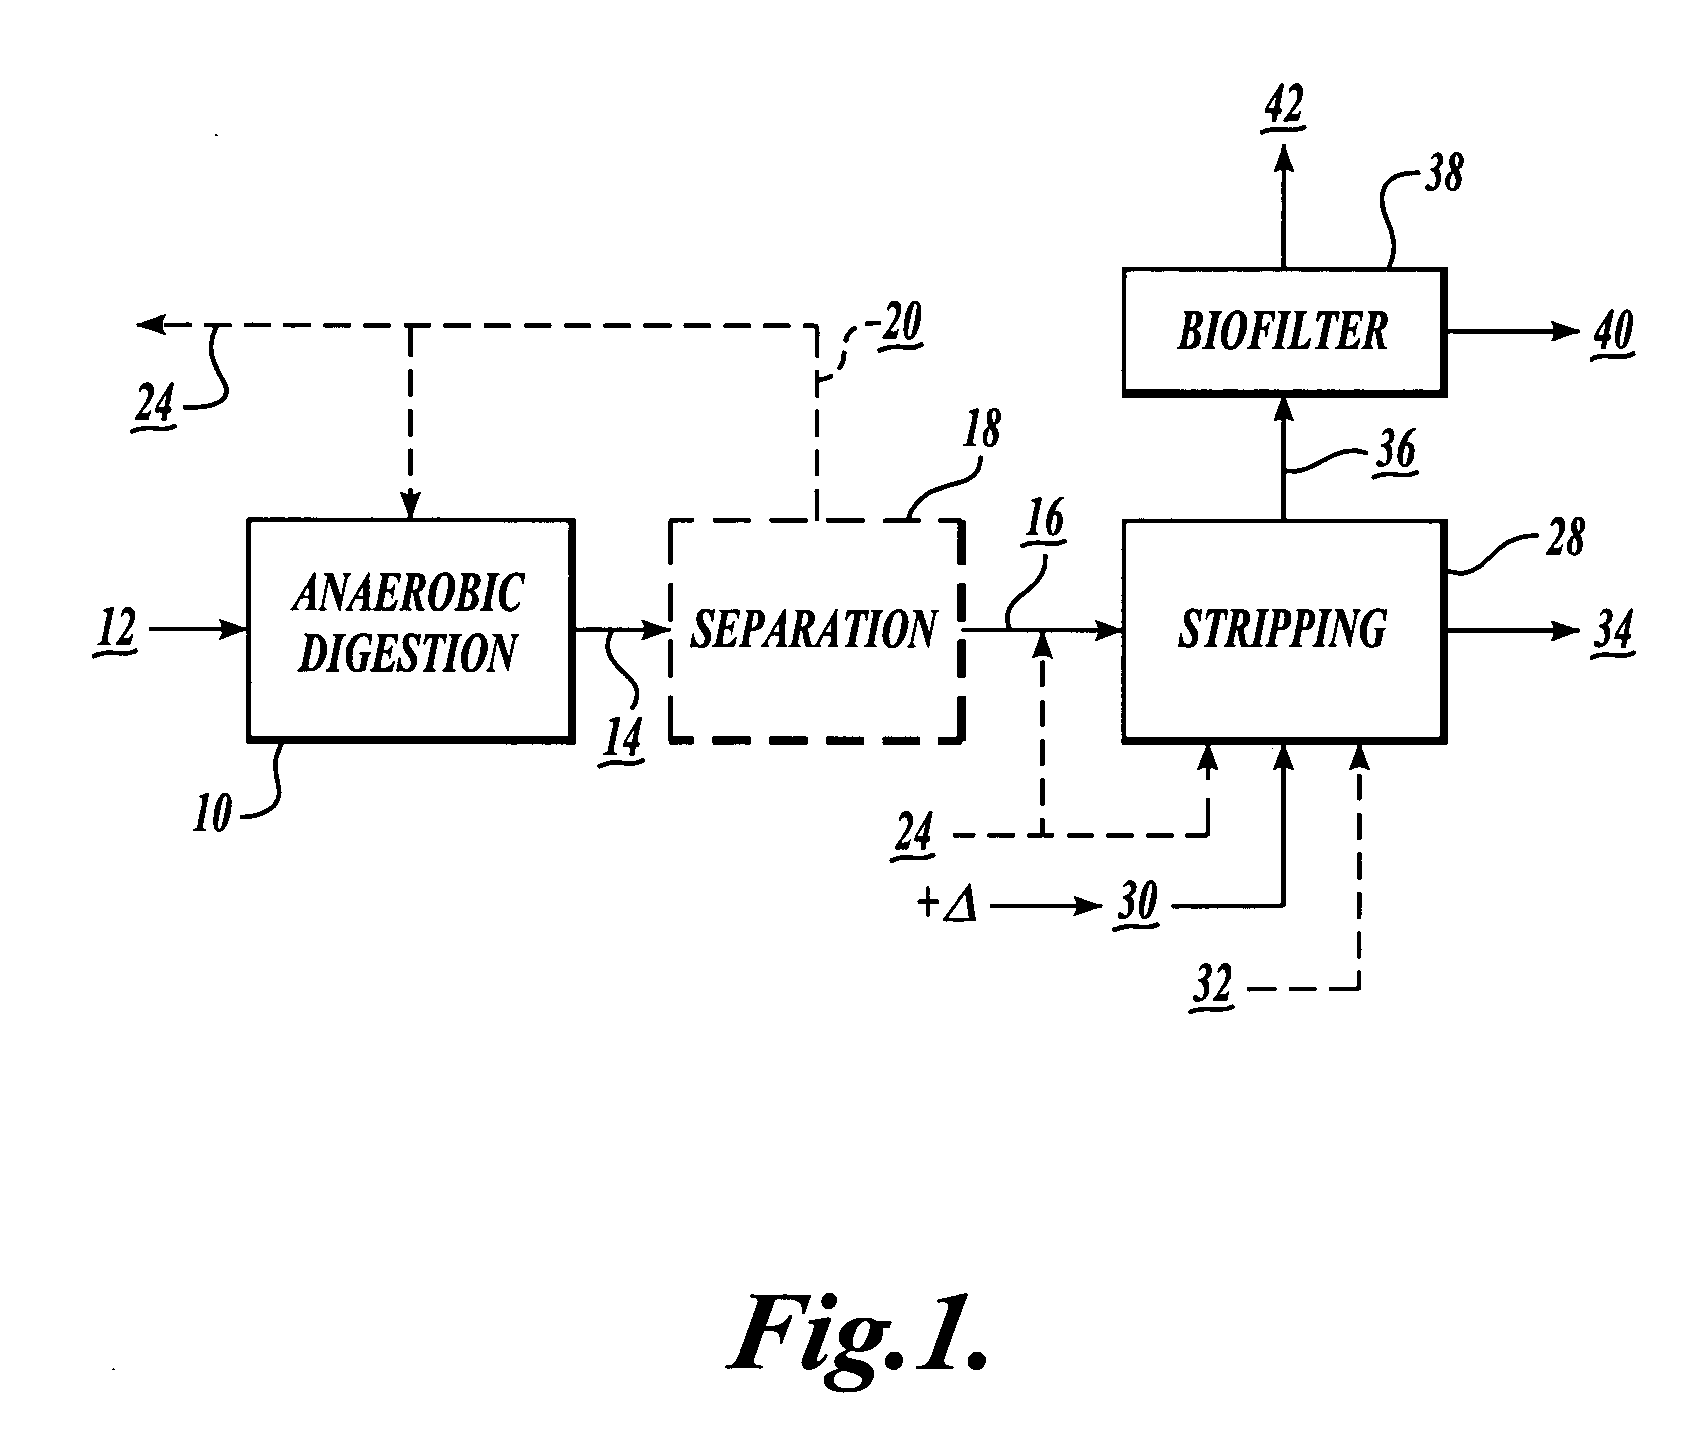 Nitrogen recovery system and method using heated air as stripping gas